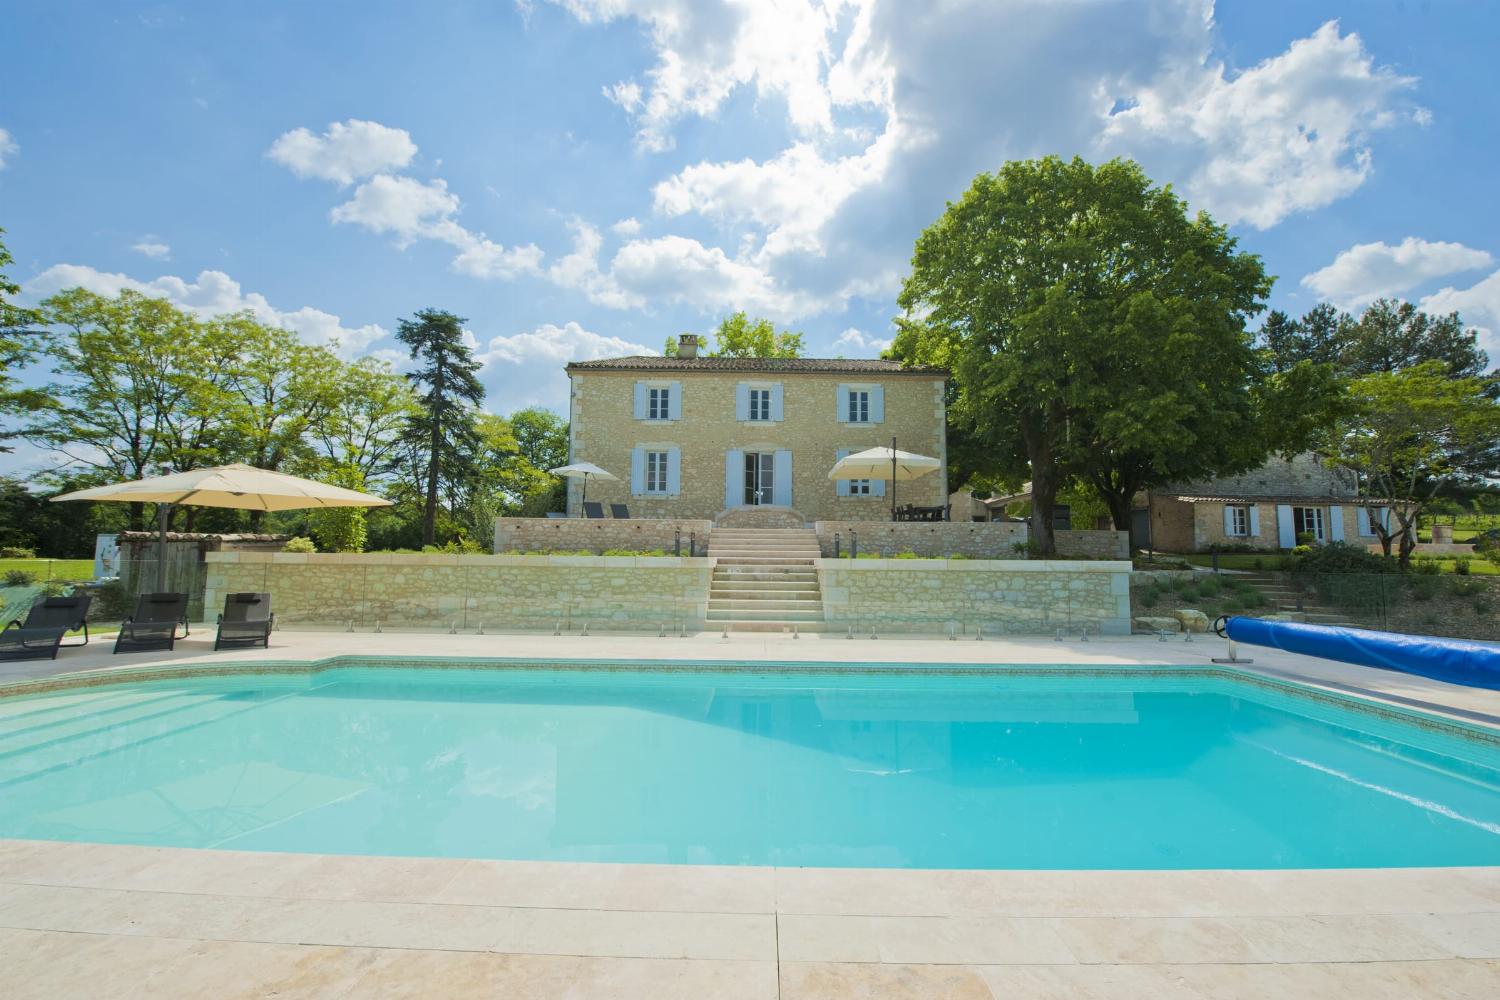 Rental home in Dordogne with private heated pool